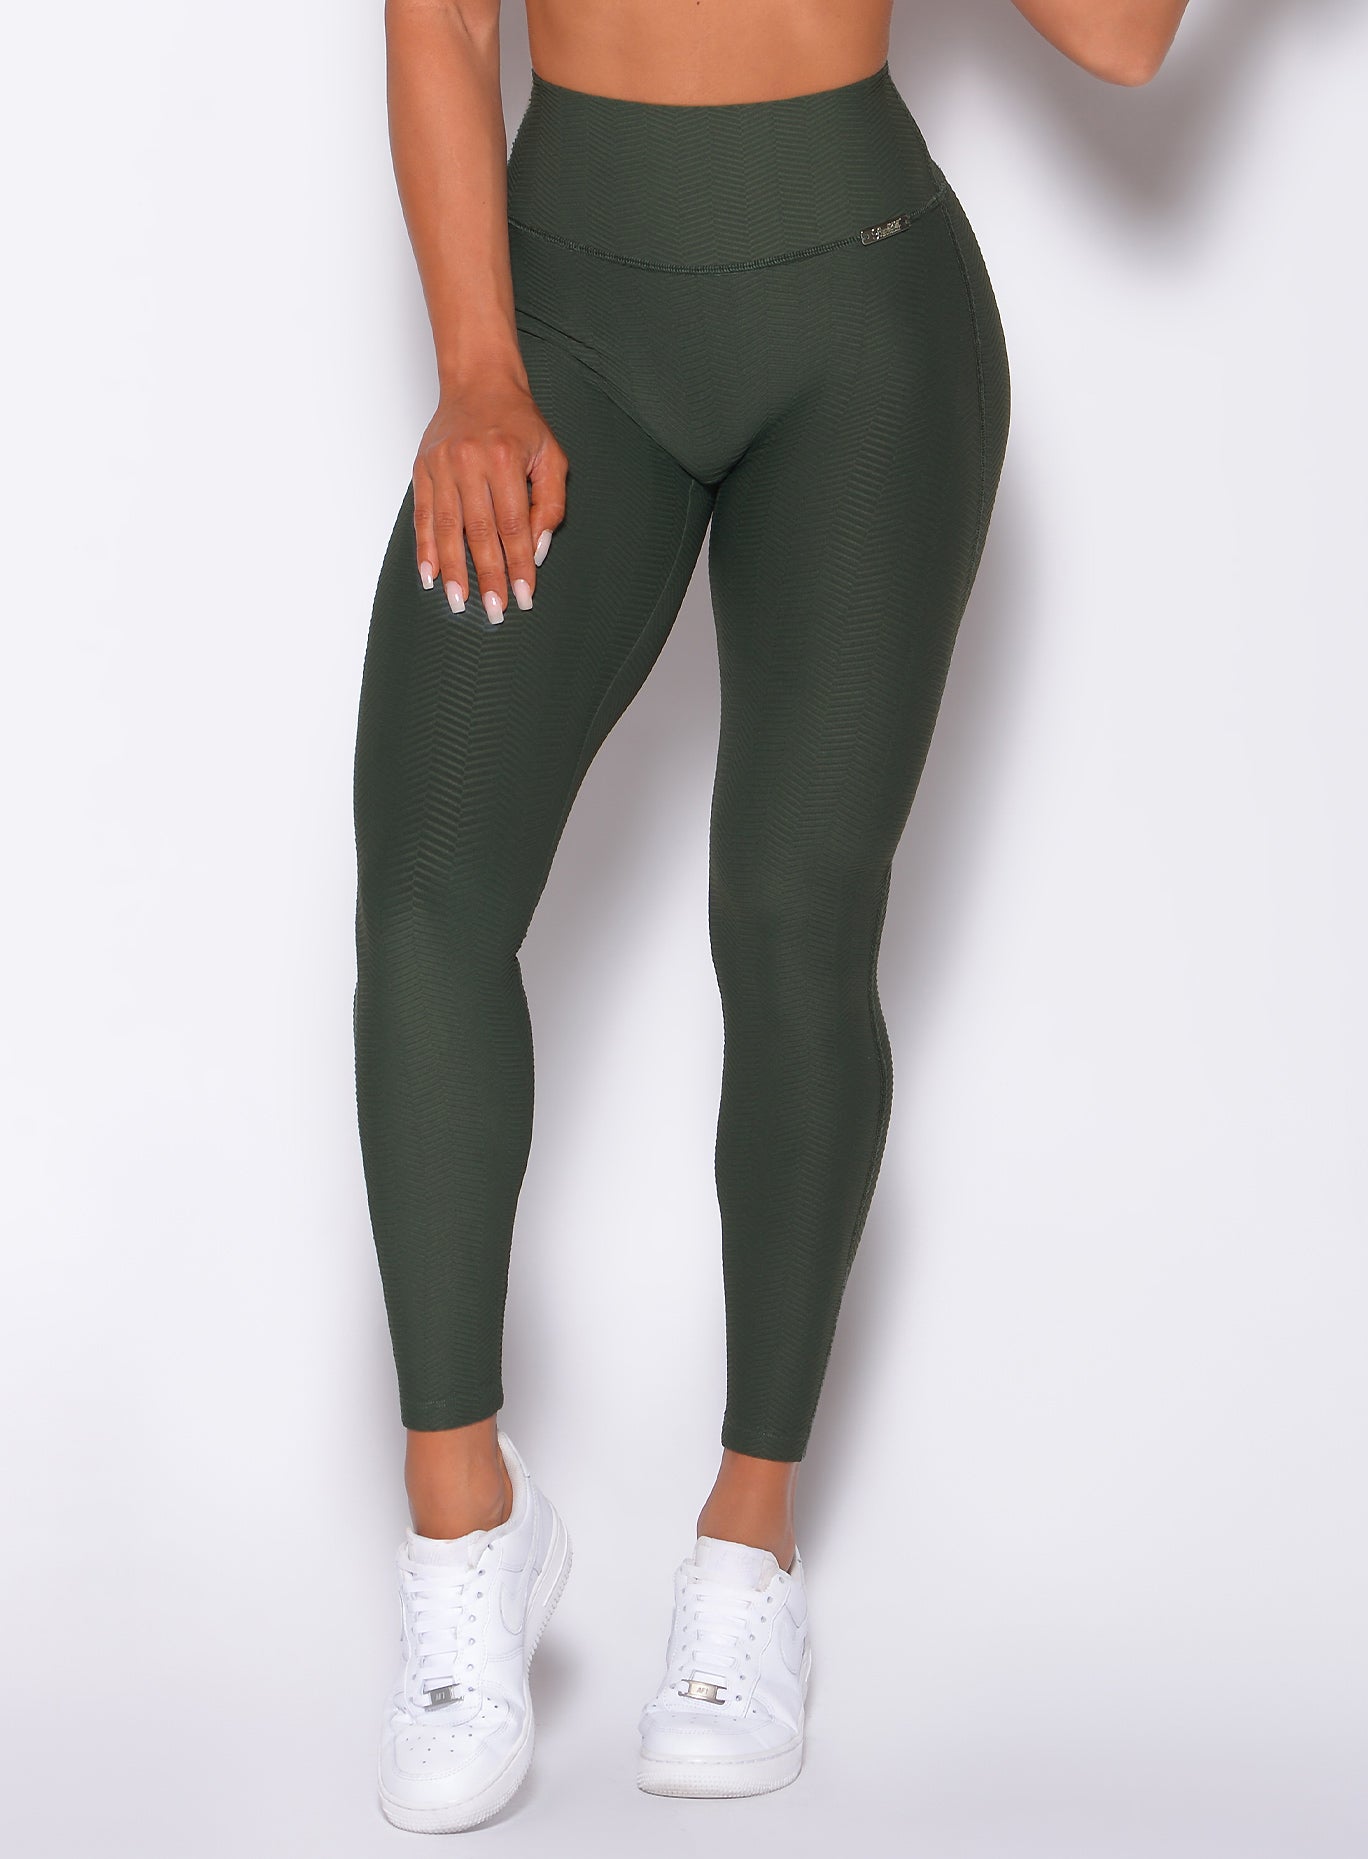 Front view of our chevron leggings in lucky green color